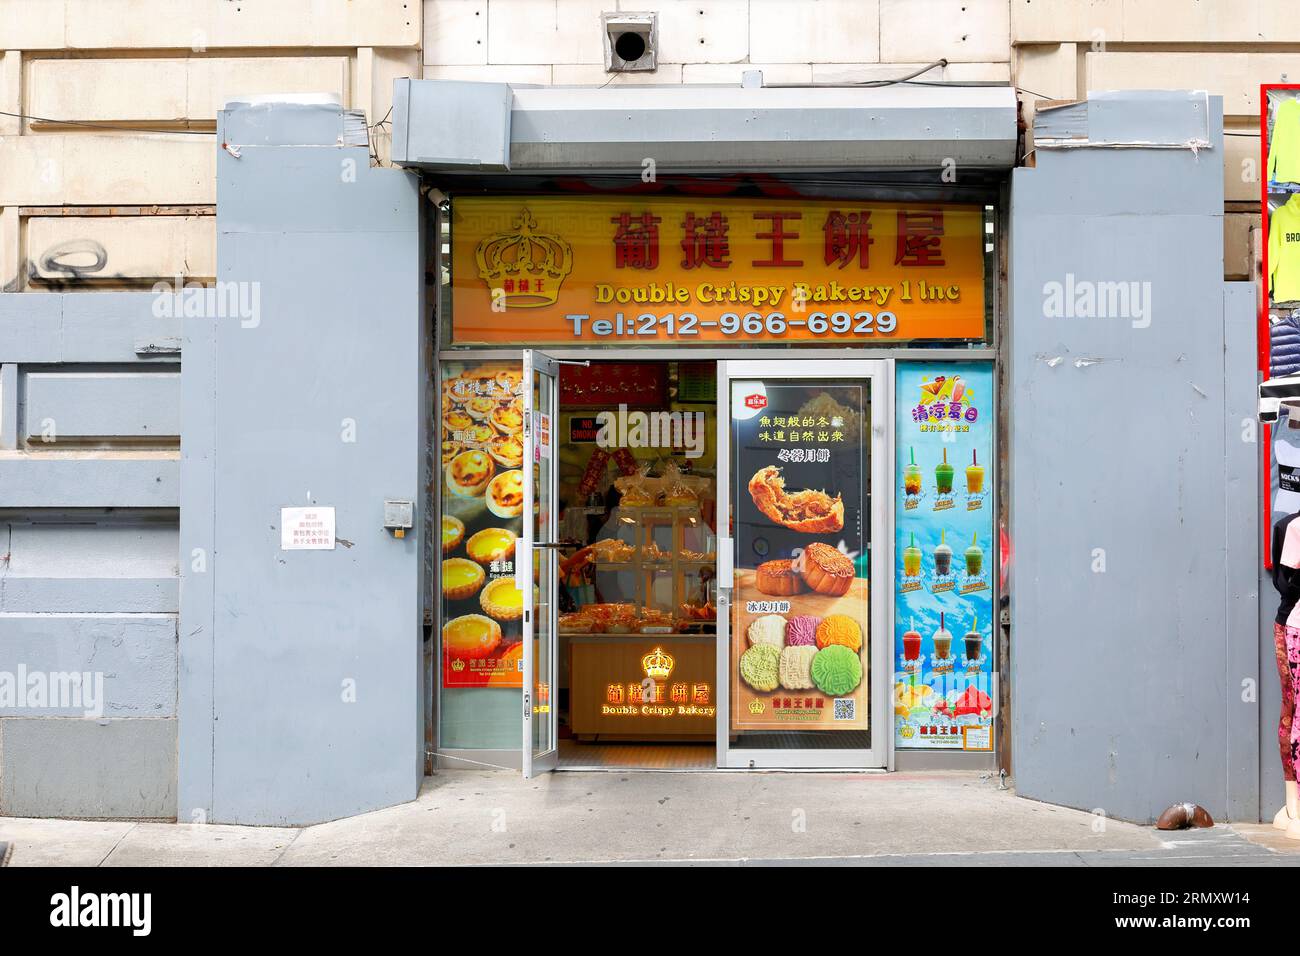 Double Crispy Bakery 葡撻王餅屋, 230 Grand St, New York, NYC storefront photo of a Chinese bakery in Manhattan Chinatown. Stock Photo